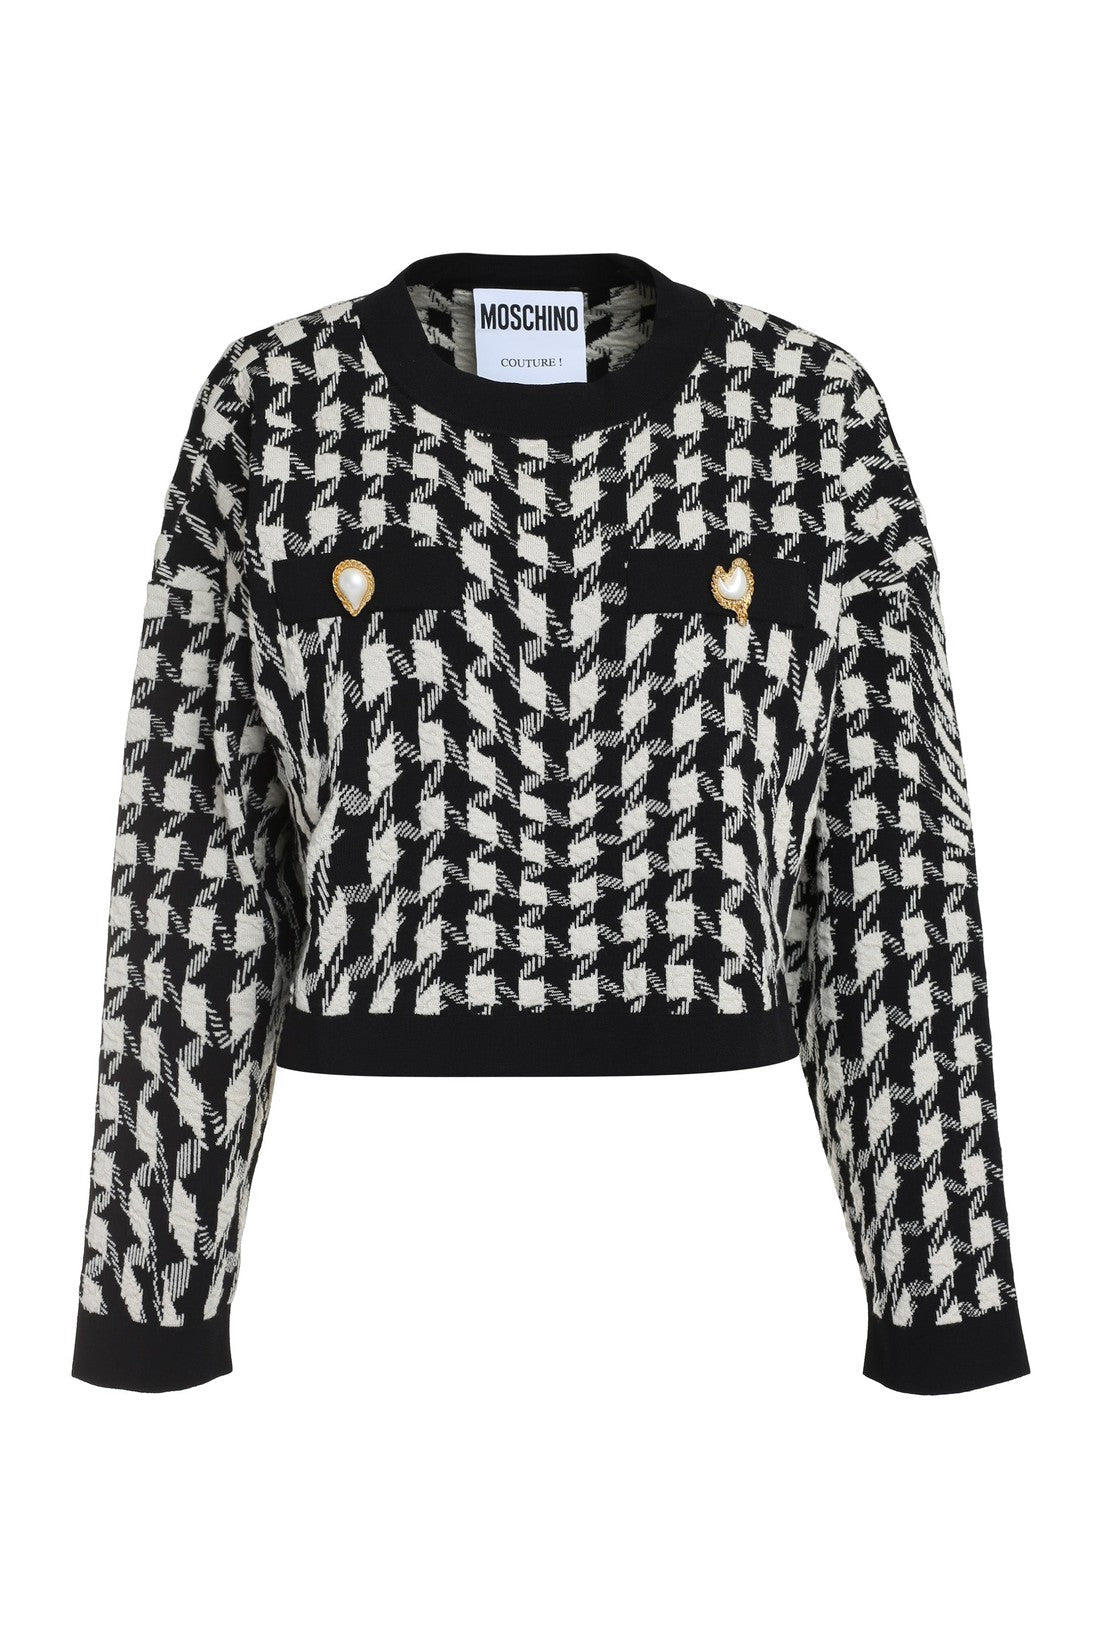 Moschino-OUTLET-SALE-Wool blend pullover-ARCHIVIST